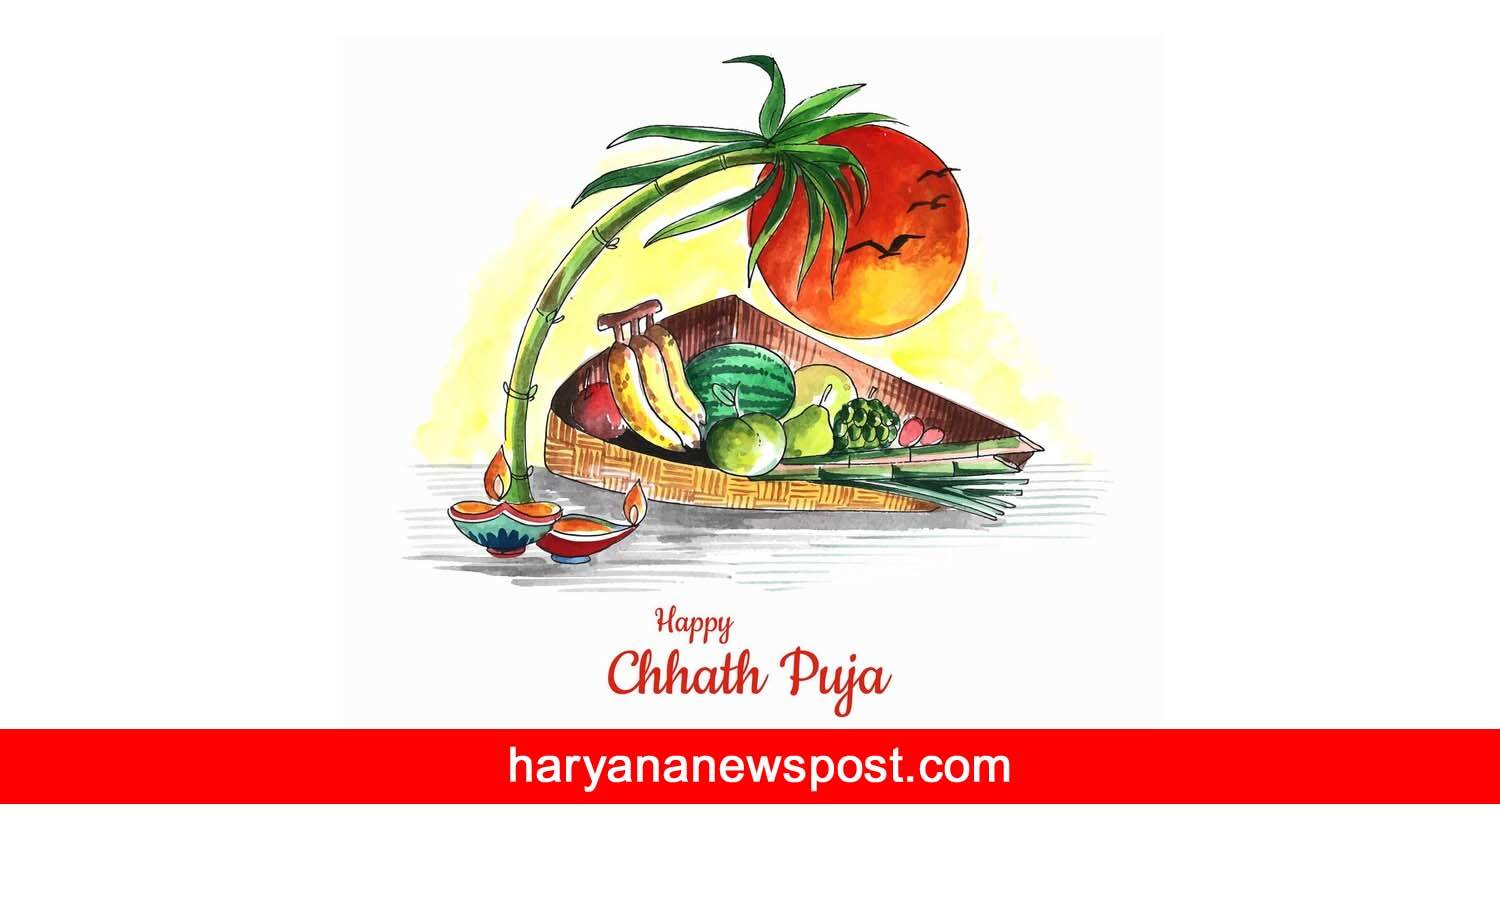 Happy Chhath Puja images, cards, photos, gifs, and posters 